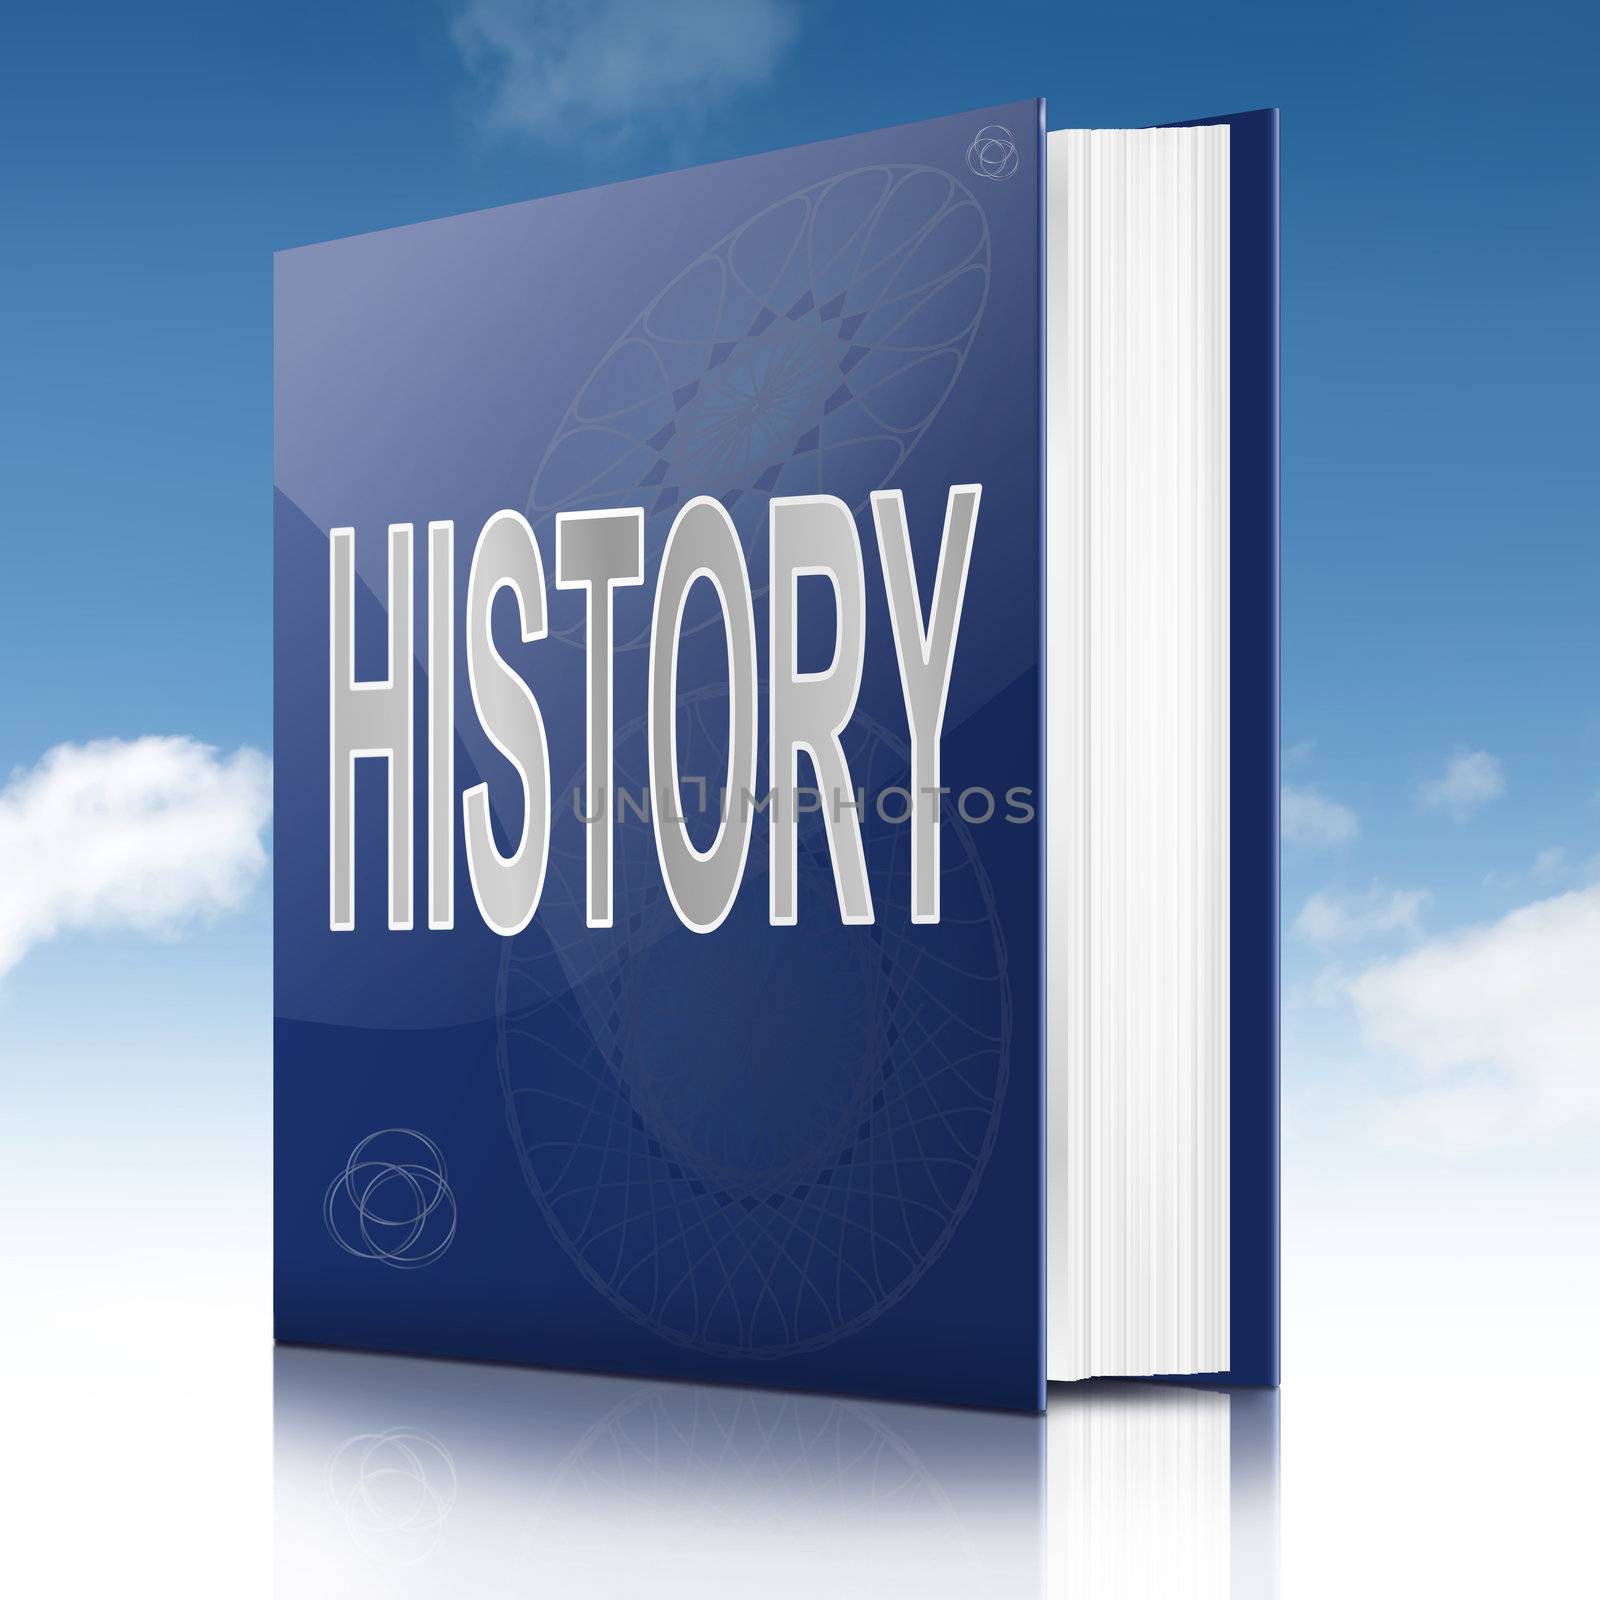 History text book. by 72soul